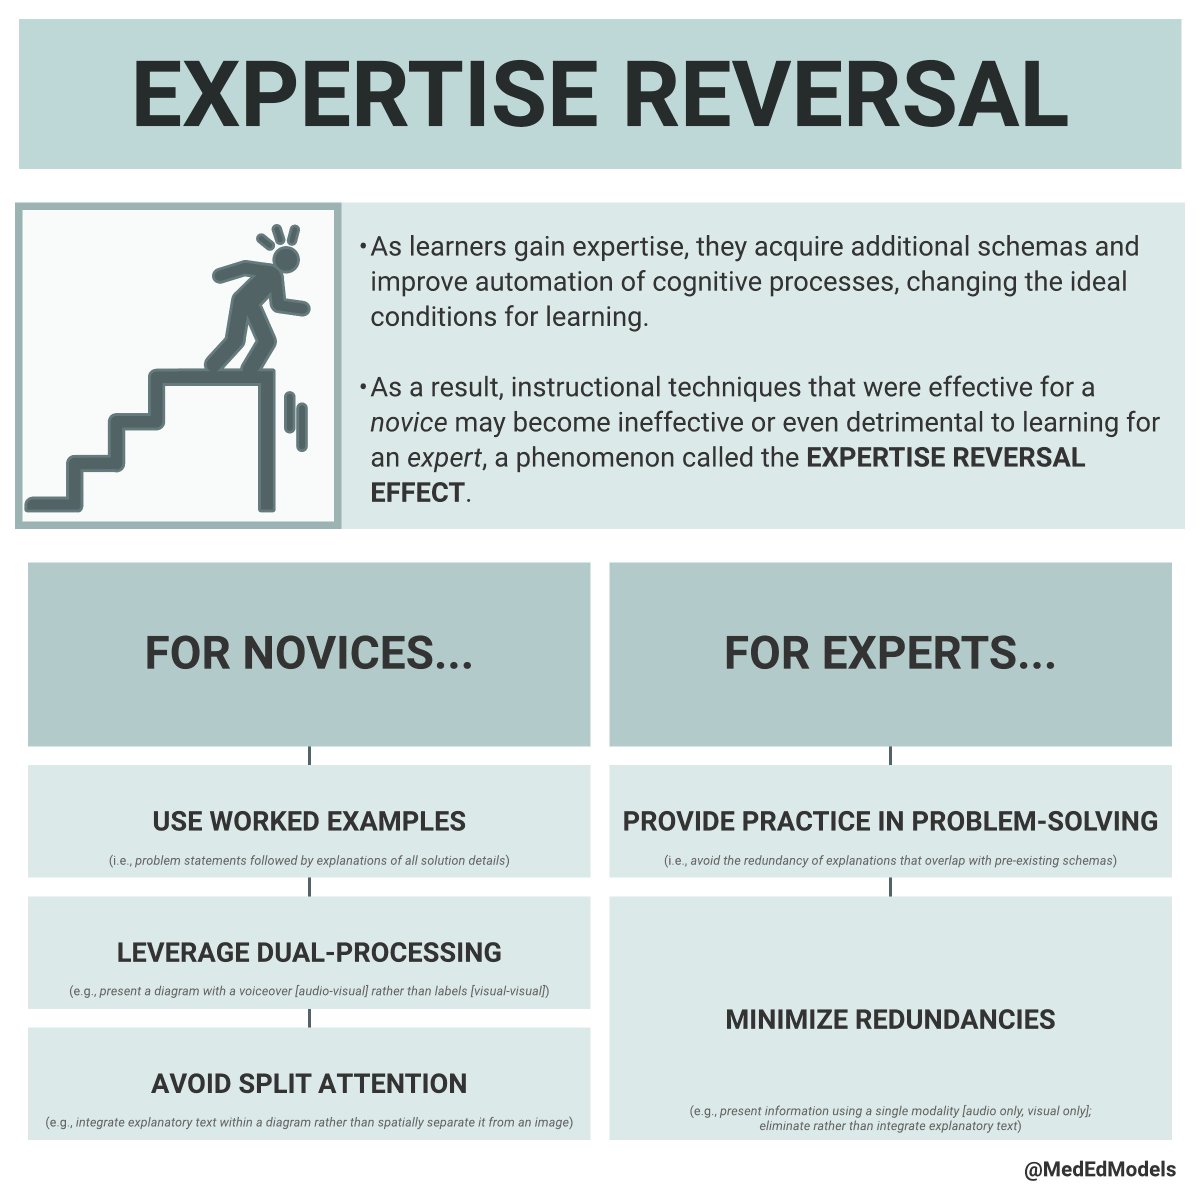 When learners have pre-existing schemas, additional scaffolding by an educator can become redundant and use up precious cognitive load.The image below suggests educational techniques and explains this effect, called “expertise reversal.”